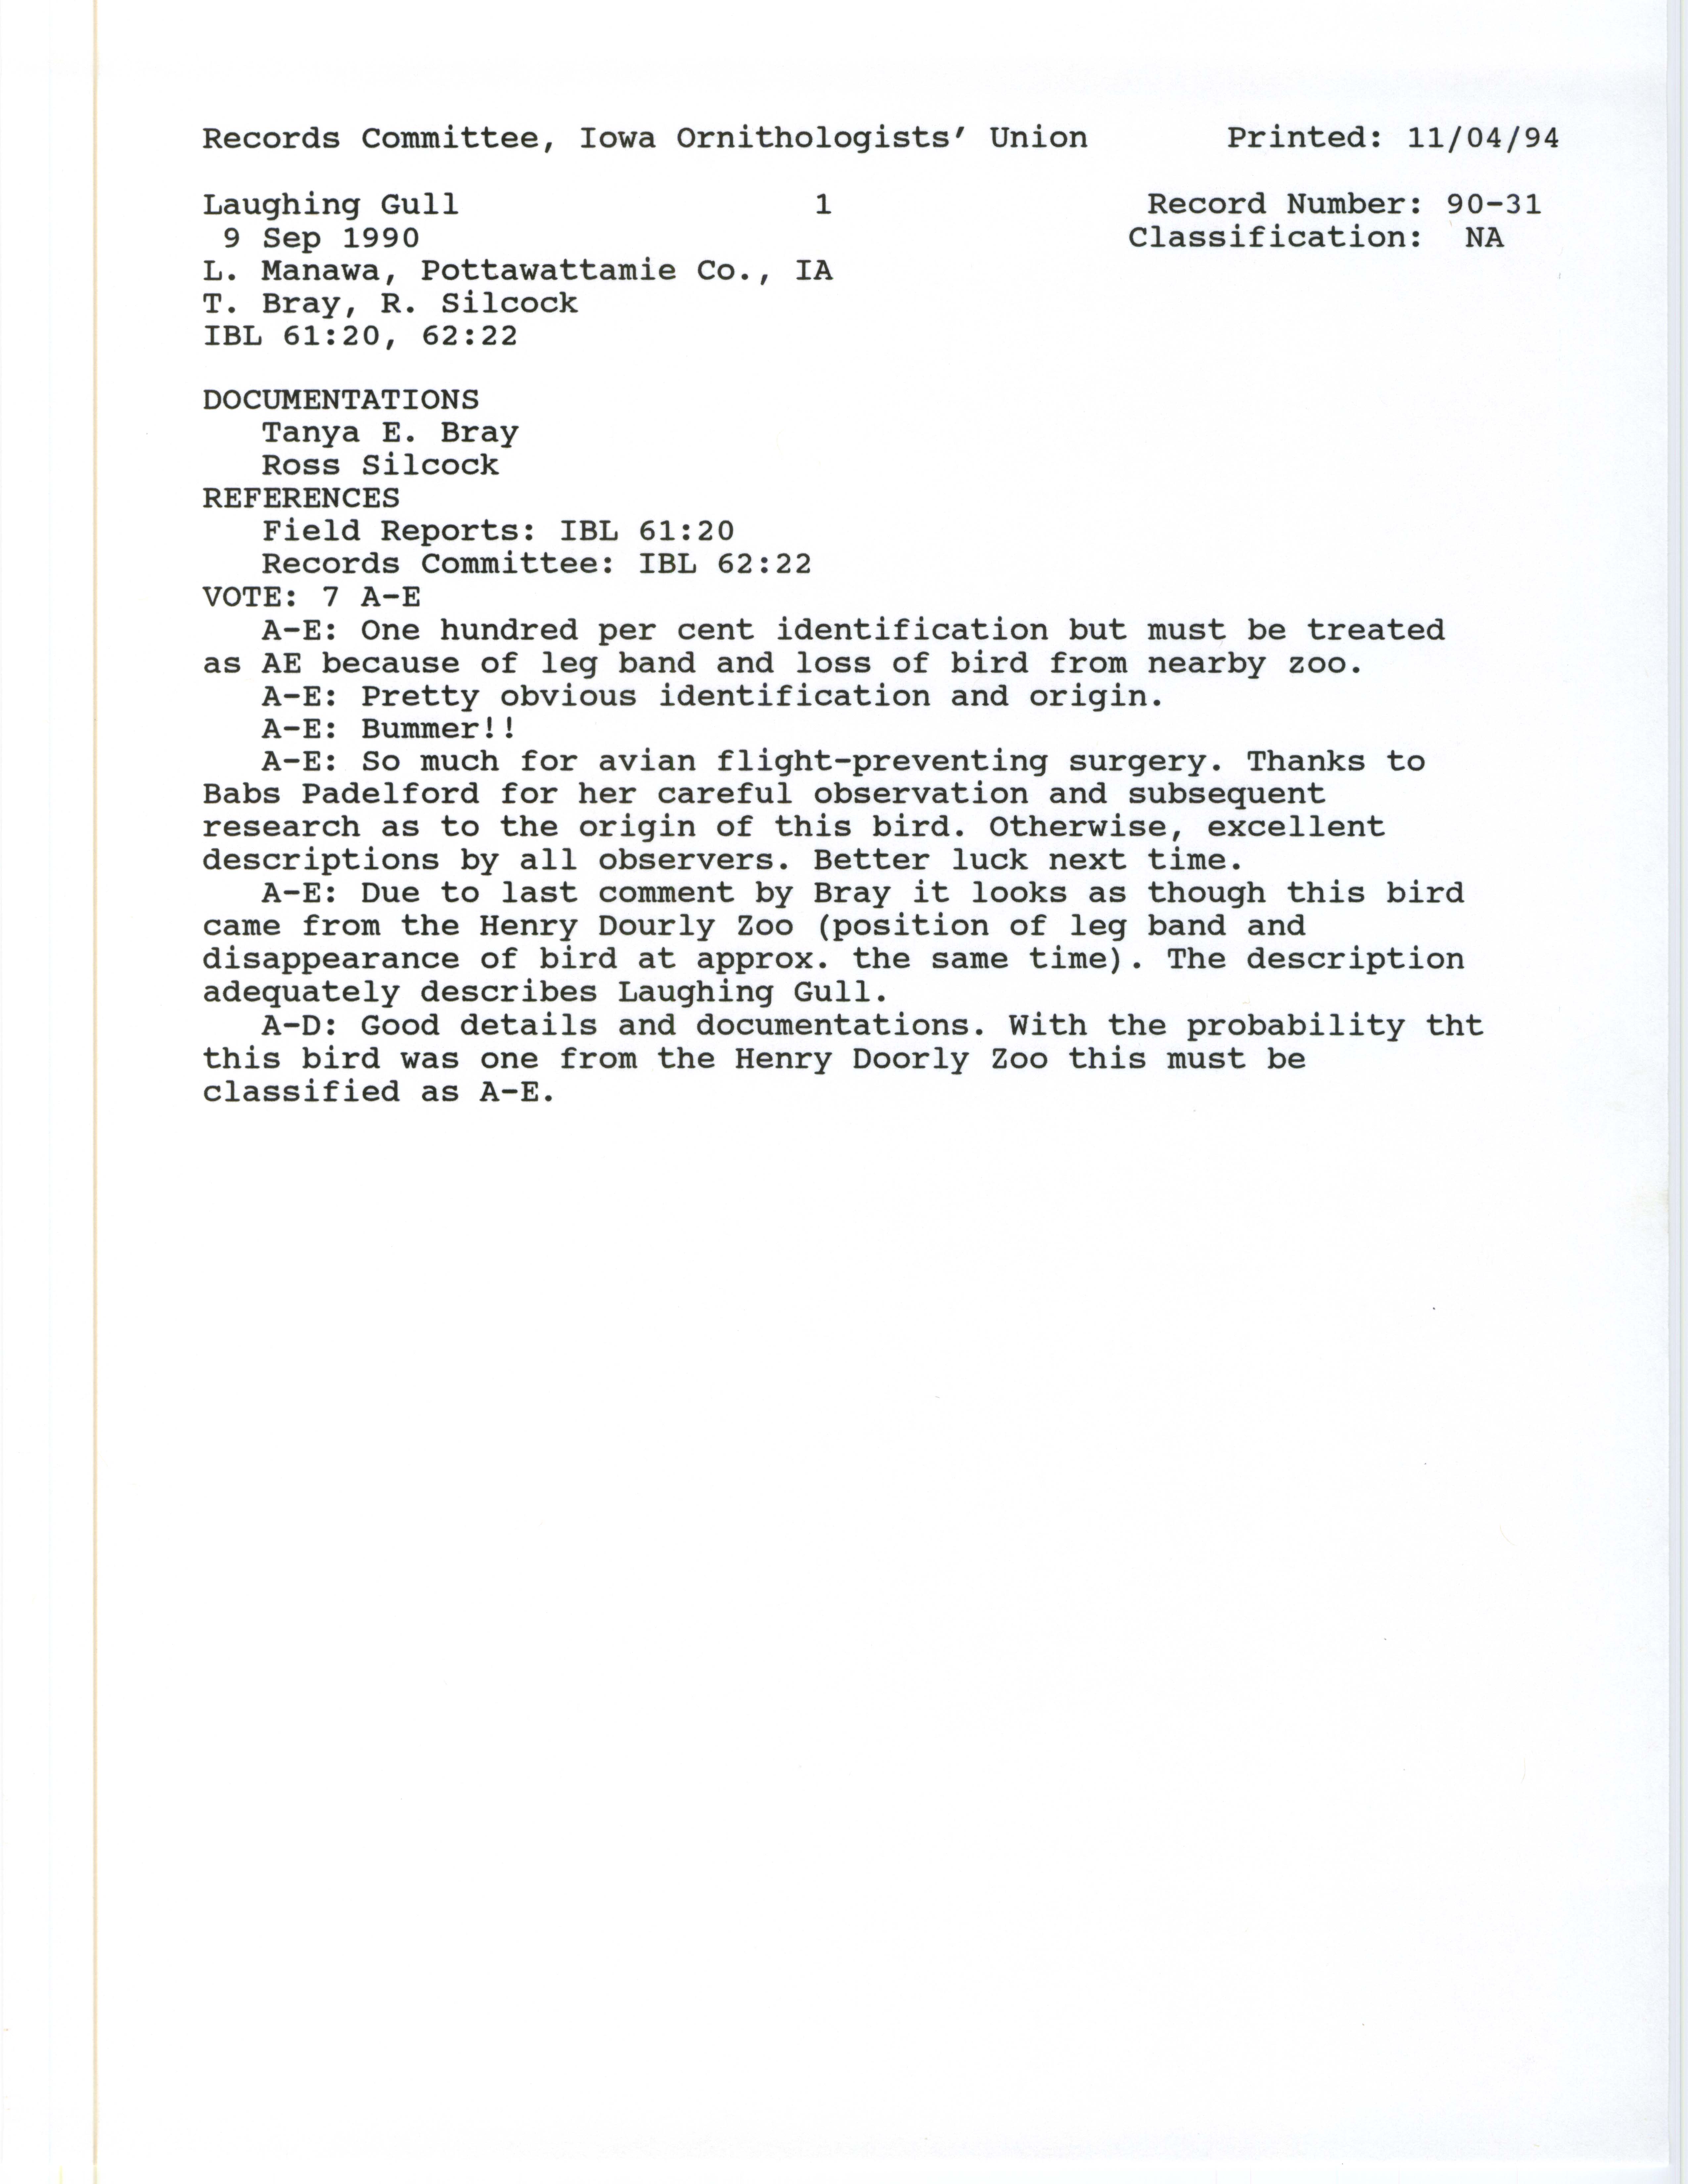 Records Committee review for rare bird sighting of Laughing Gull at Lake Manawa, 1990